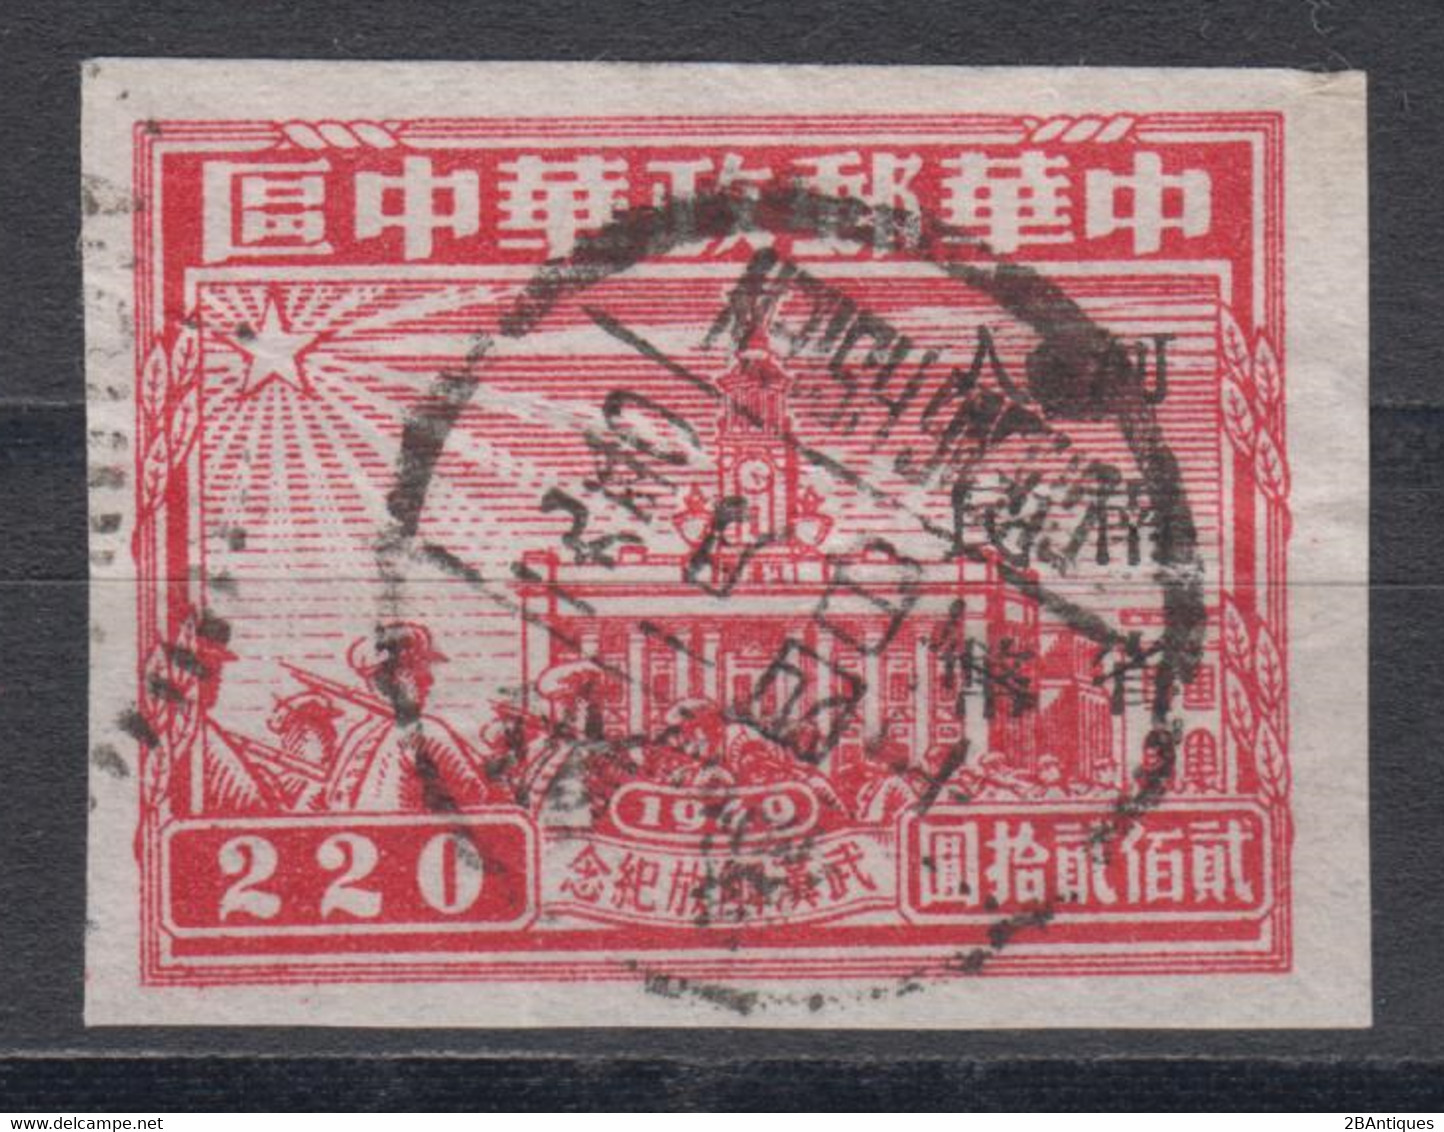 CENTRAL CHINA 1949 -  Liberation Of Hankau, Hanyang & Wuchang IMPERFORATE WITH OVERPRINT - Chine Centrale 1948-49